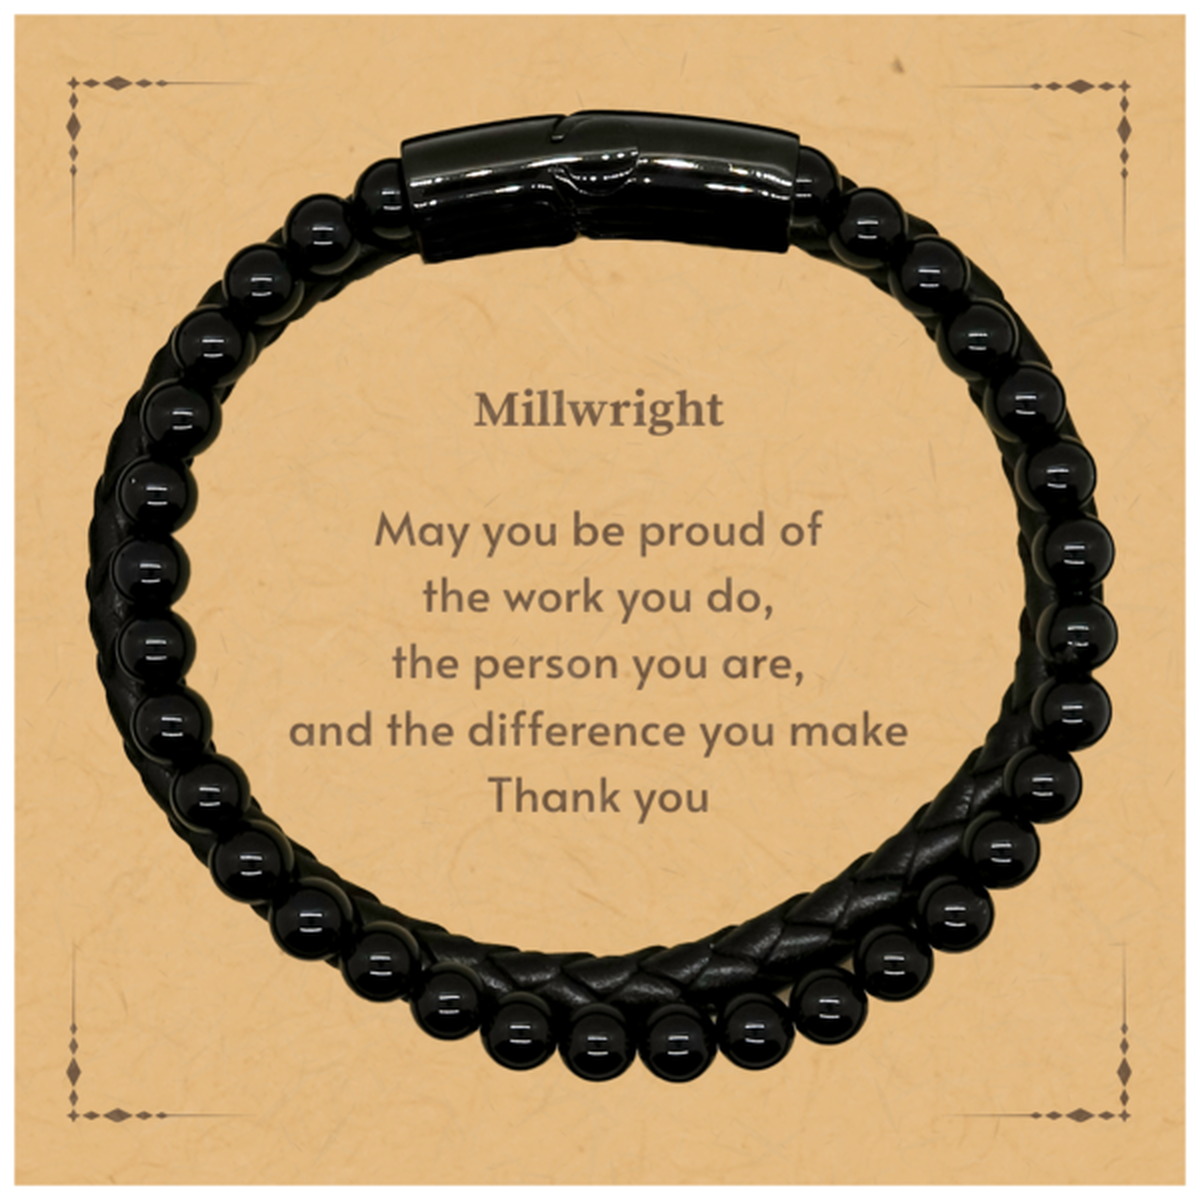 Heartwarming Stone Leather Bracelets Retirement Coworkers Gifts for Millwright, Millwright May You be proud of the work you do, the person you are Gifts for Boss Men Women Friends